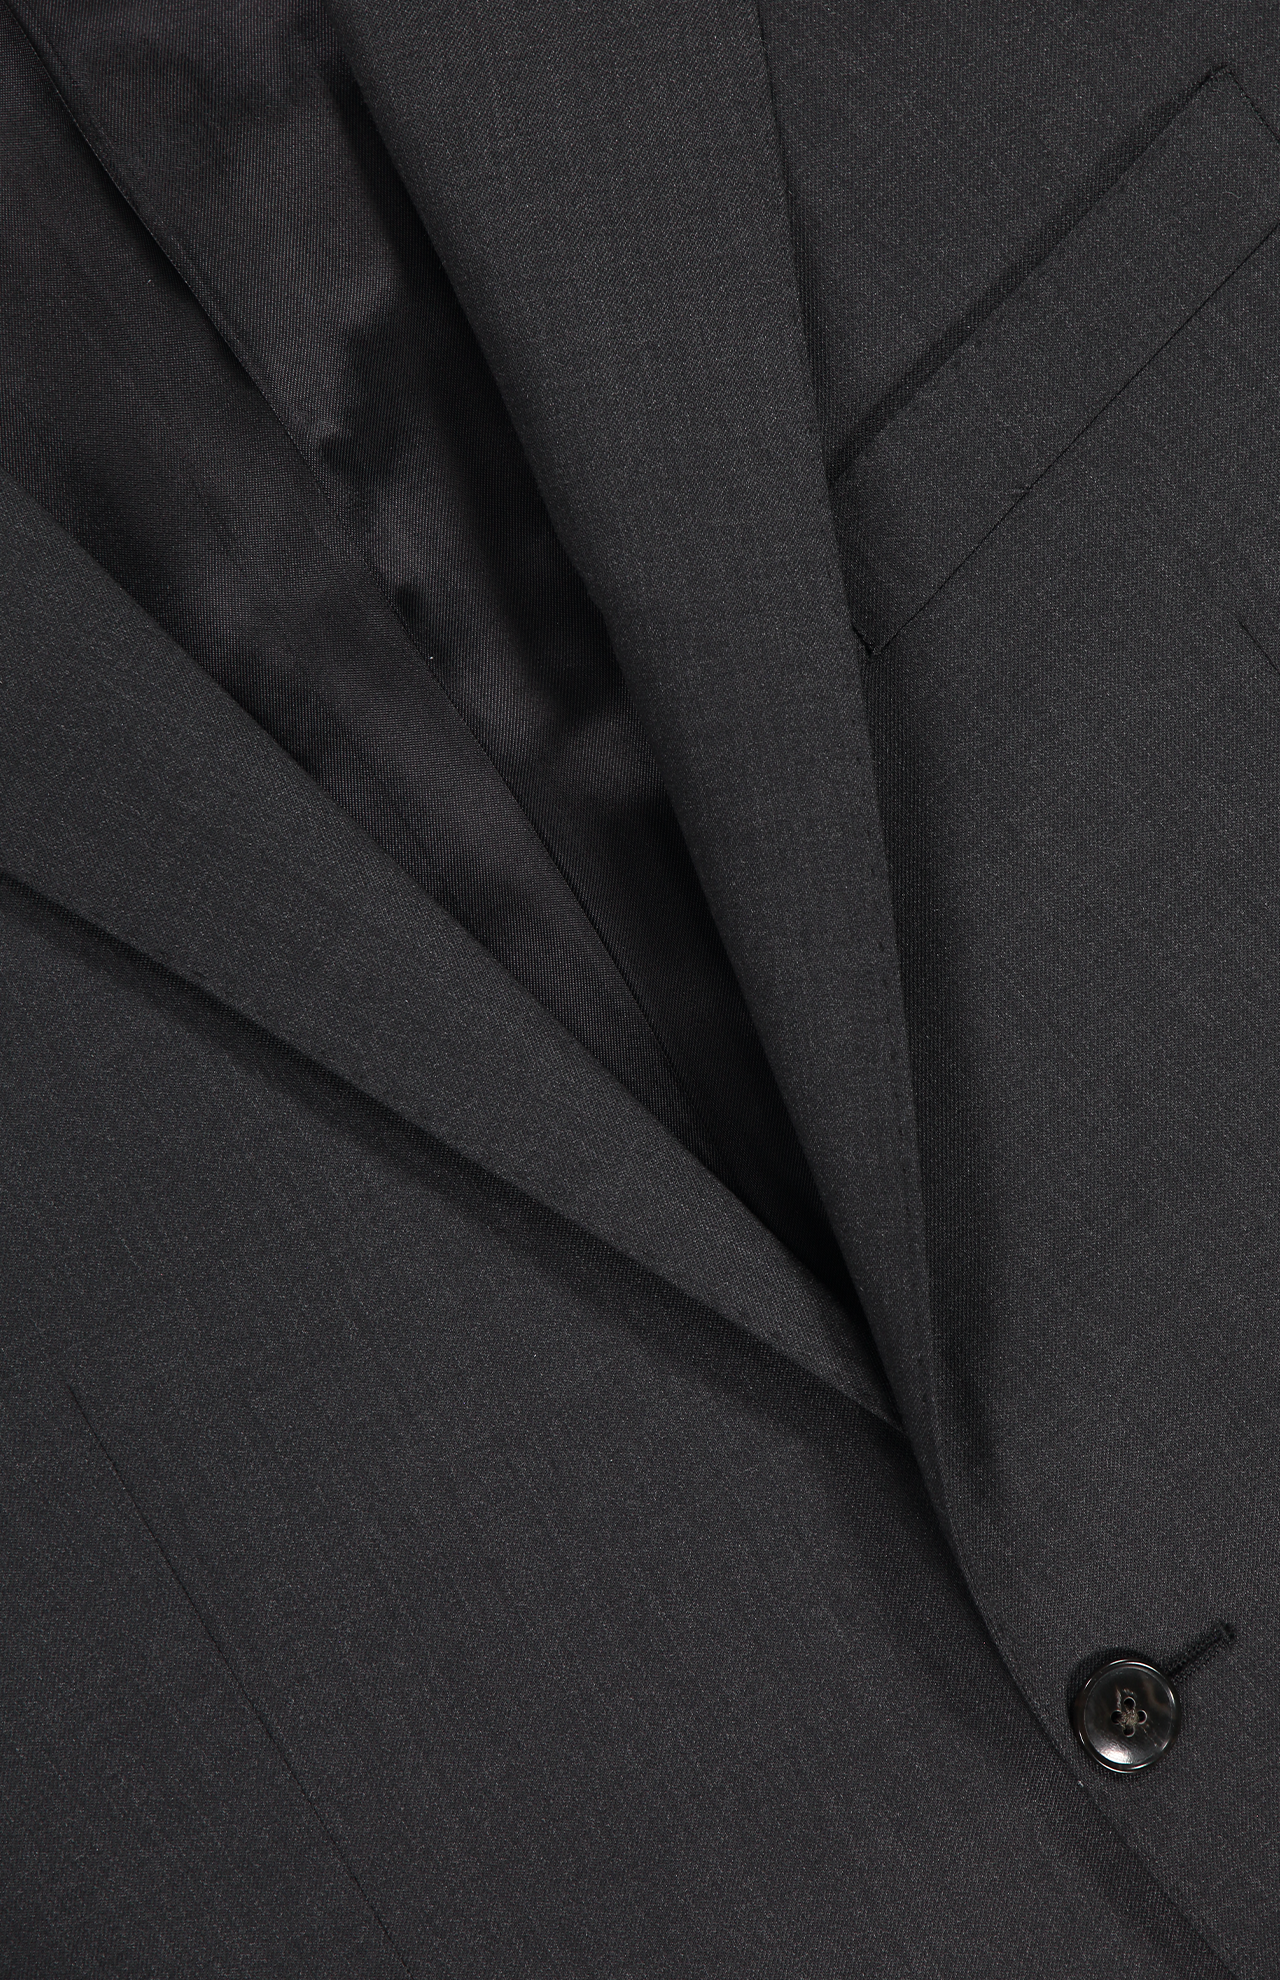 Atelier Munro Stretch Wool Suit Charcoal Collar Detail Image (6998653534323)